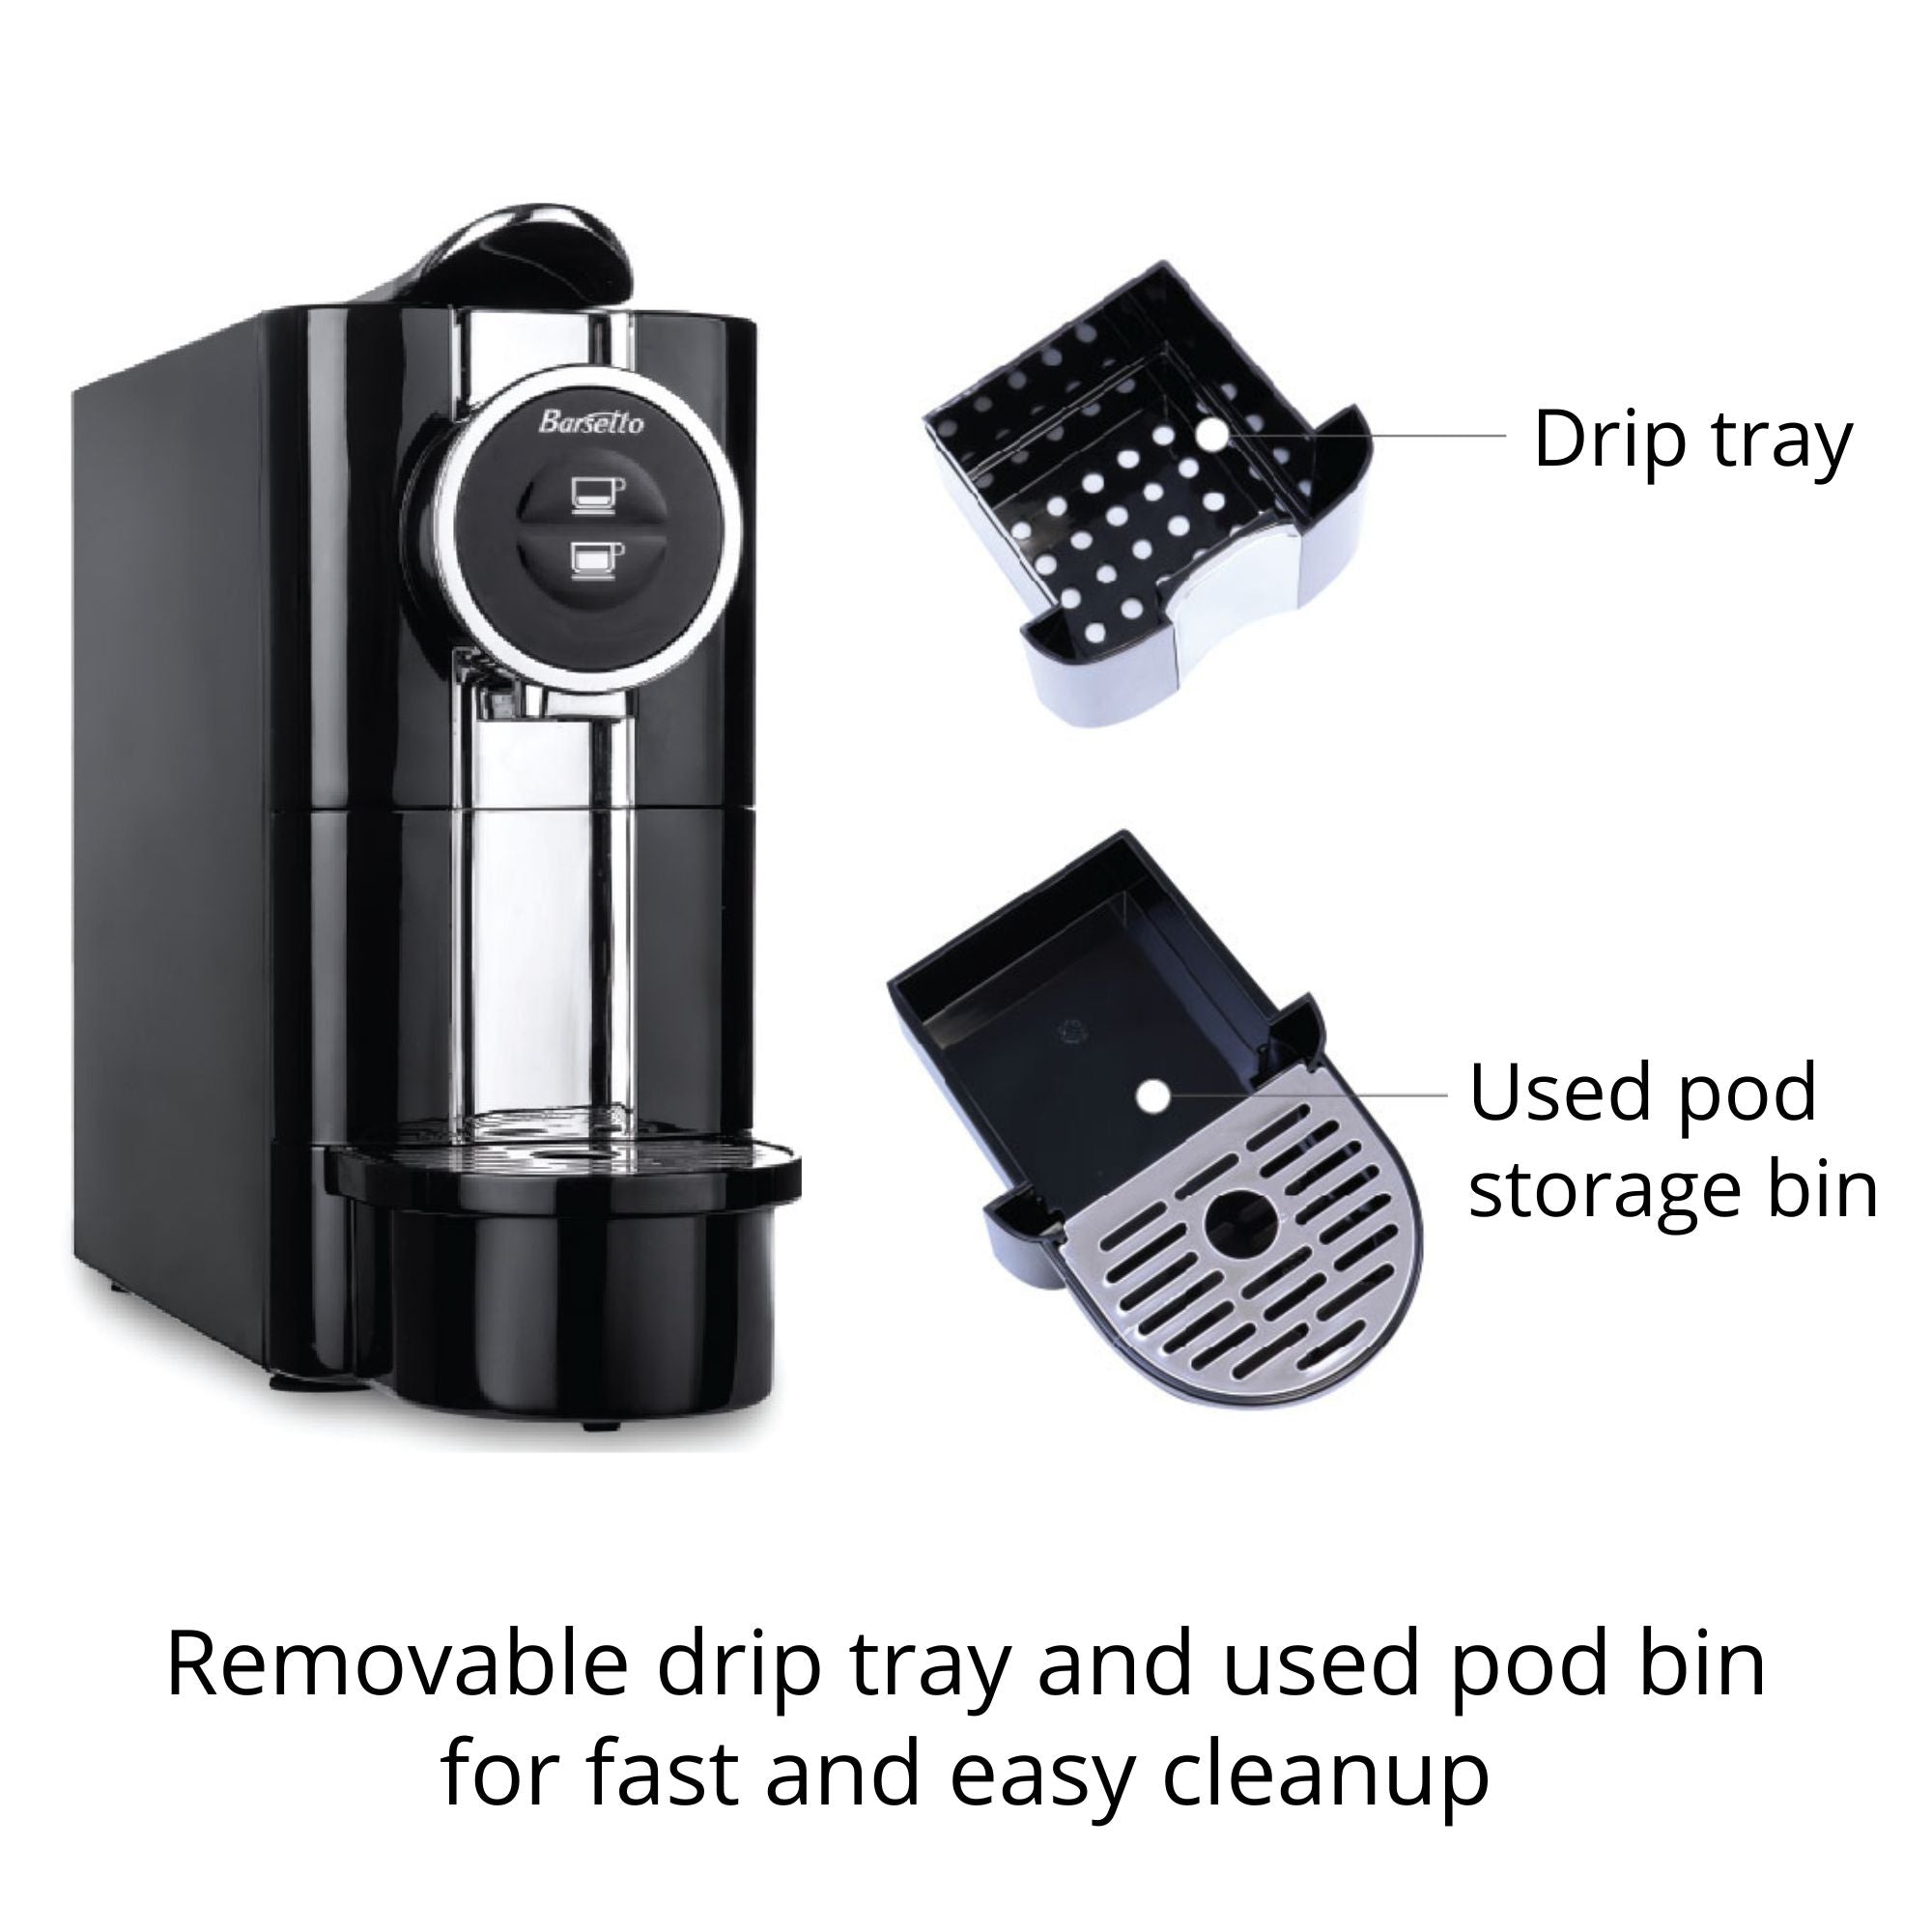 Product shot of Barsetto automatic espresso maker on a white background with images of the removable drip tray and used pod storage bin, labeled, to the right. Text below reads, "Removable drip tray and used pod bin for fast and easy cleanup"